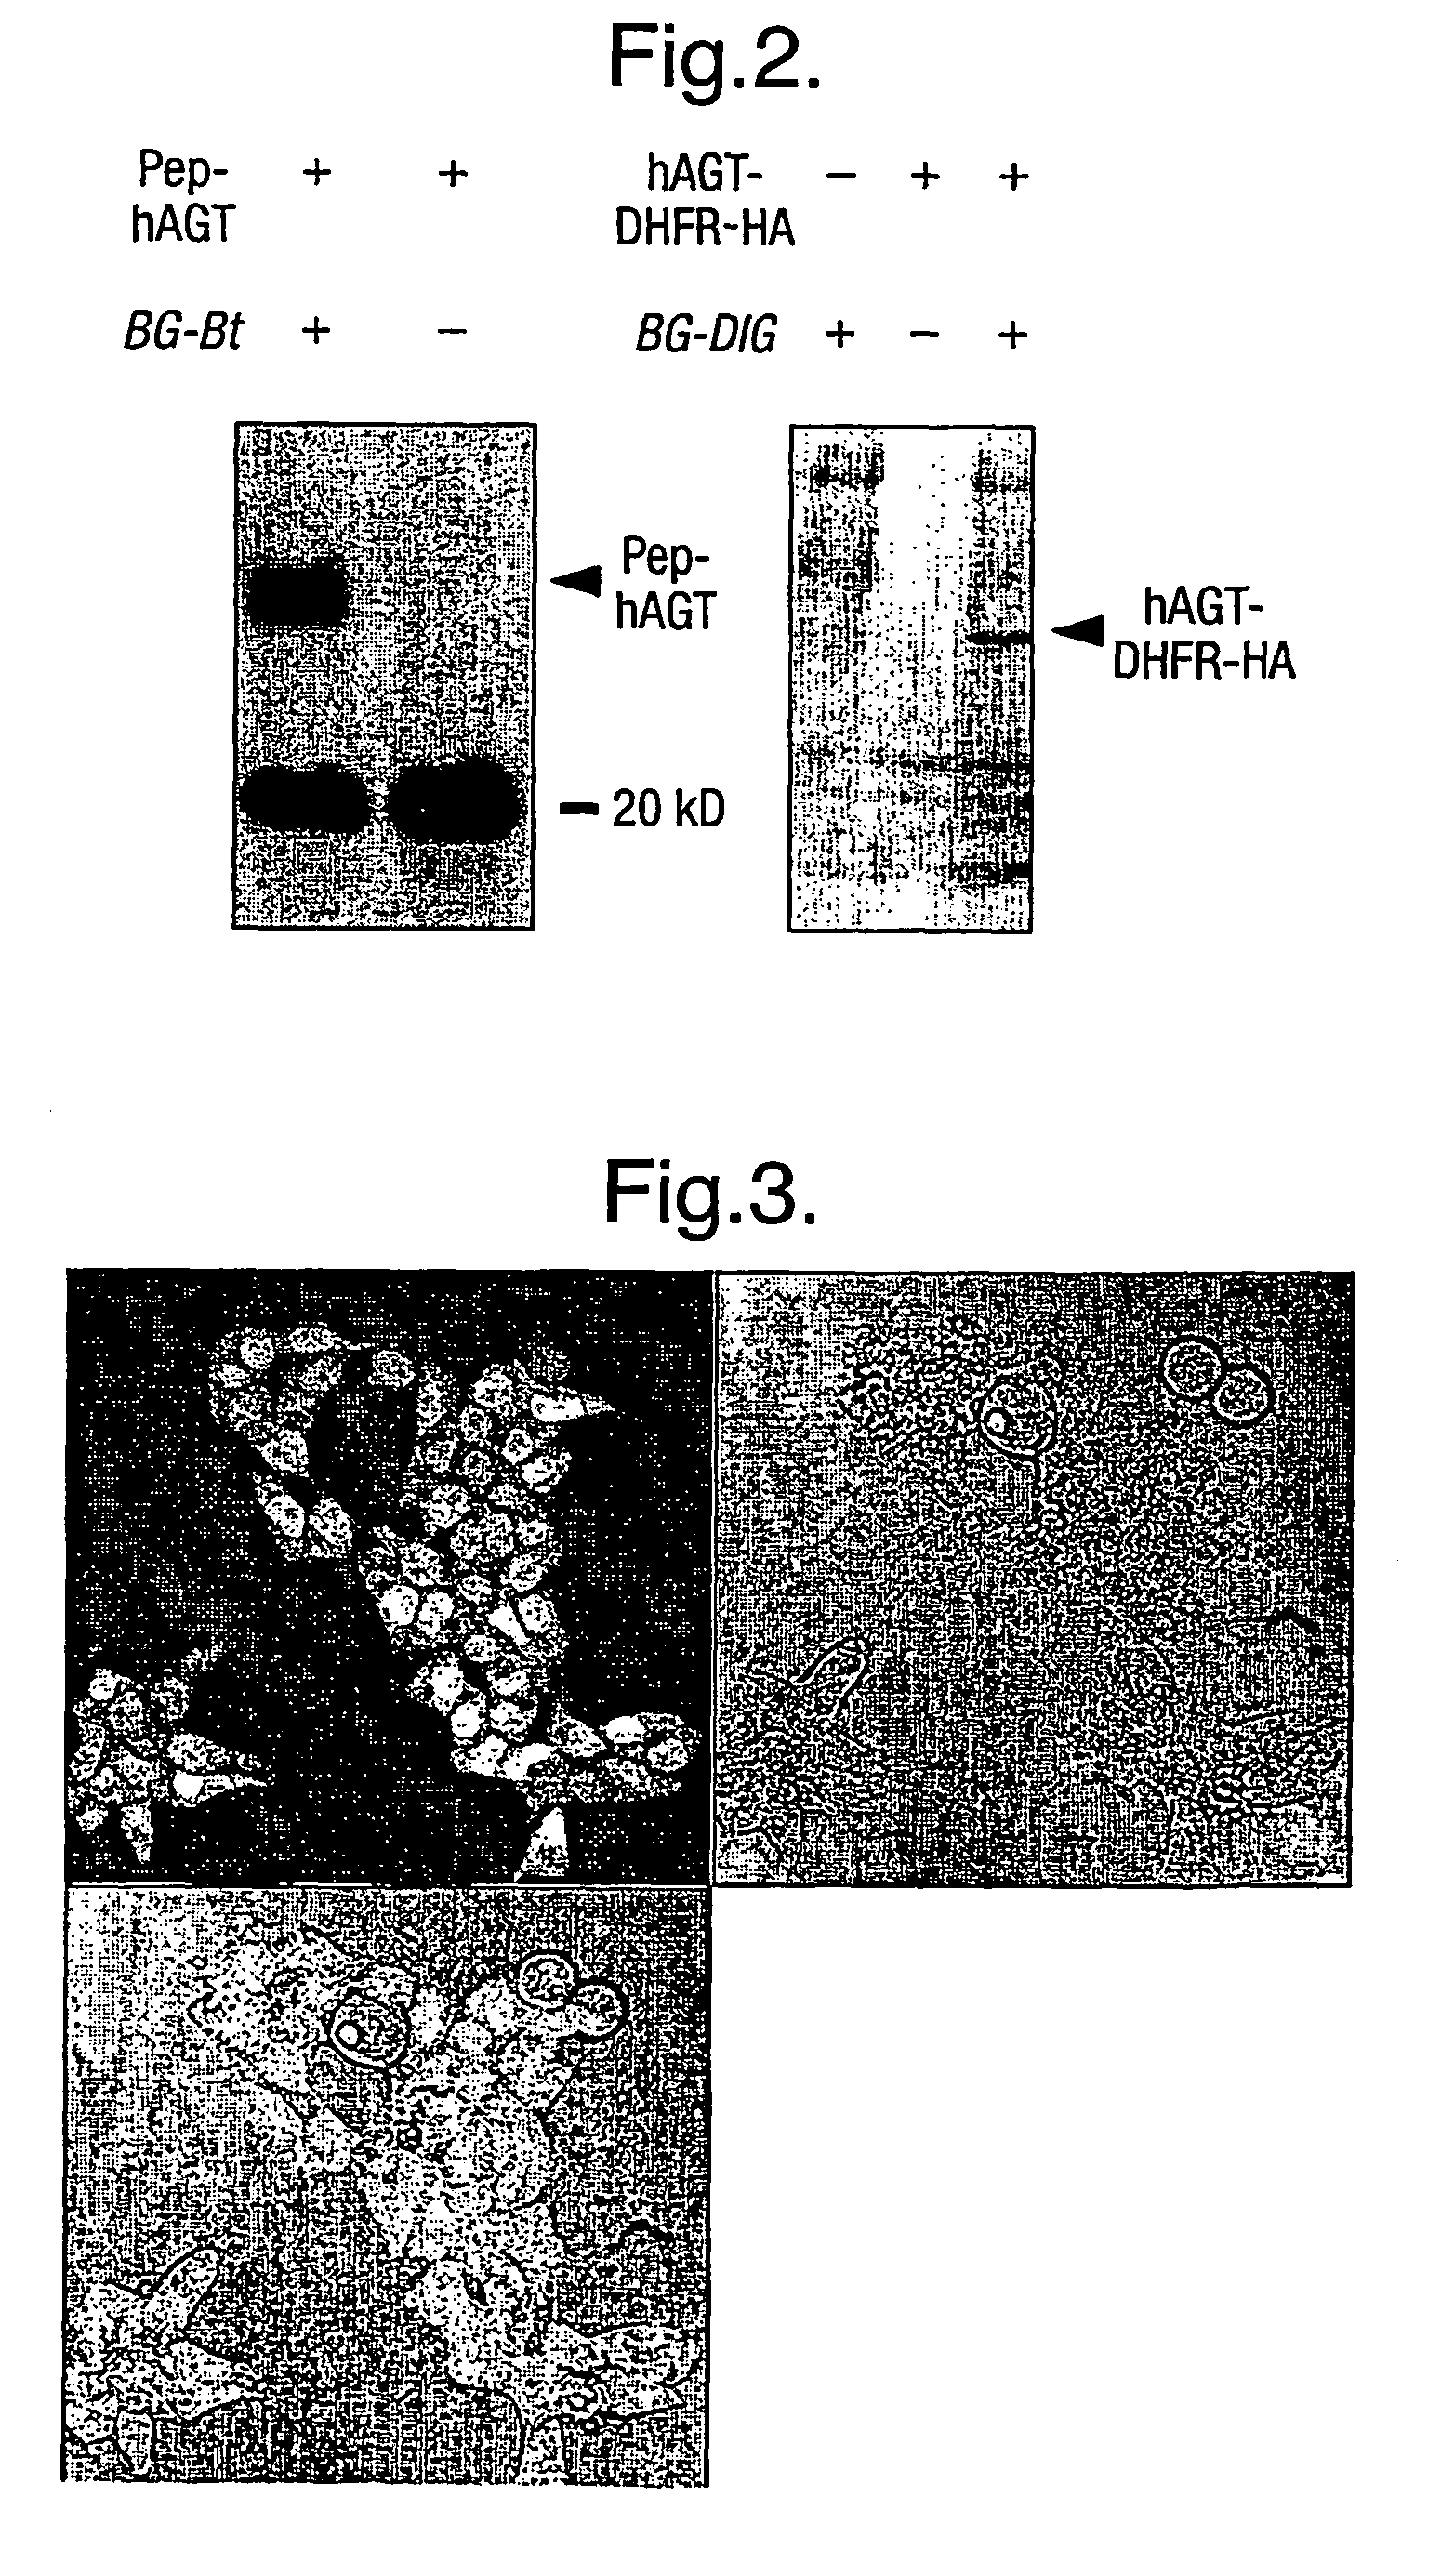 Methods using O6-alkylguanine-DNA alkyltransferases